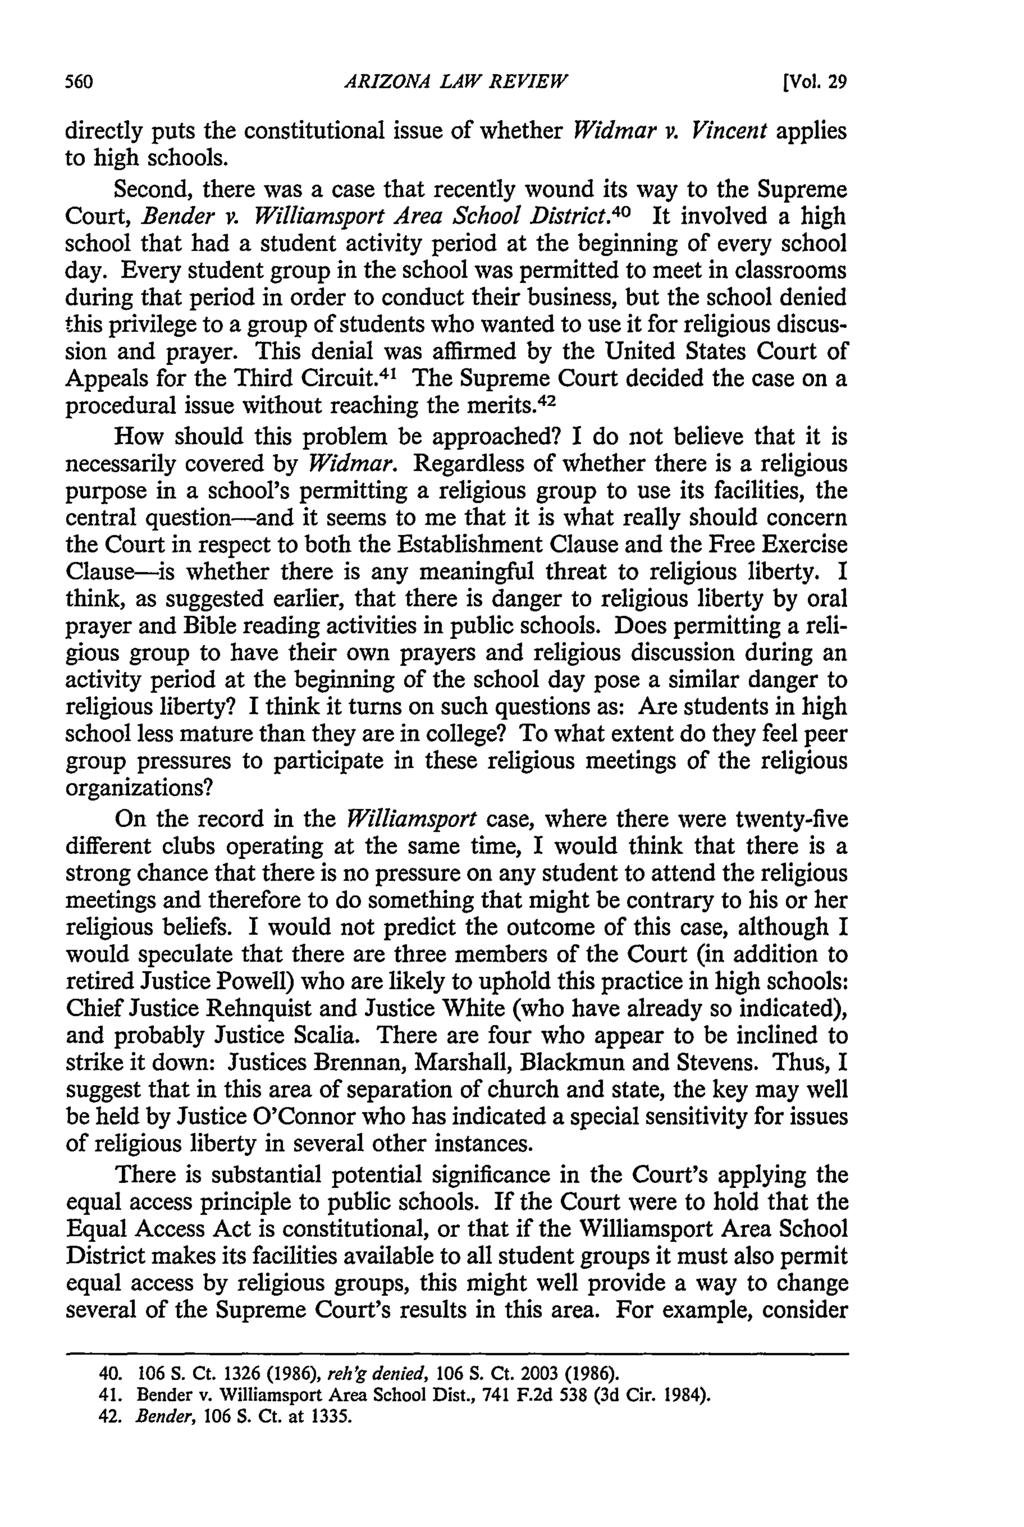 ARIZONA LAW REVIEW [Vol. 29 directly puts the constitutional issue of whether Widmar v. Vincent applies to high schools.